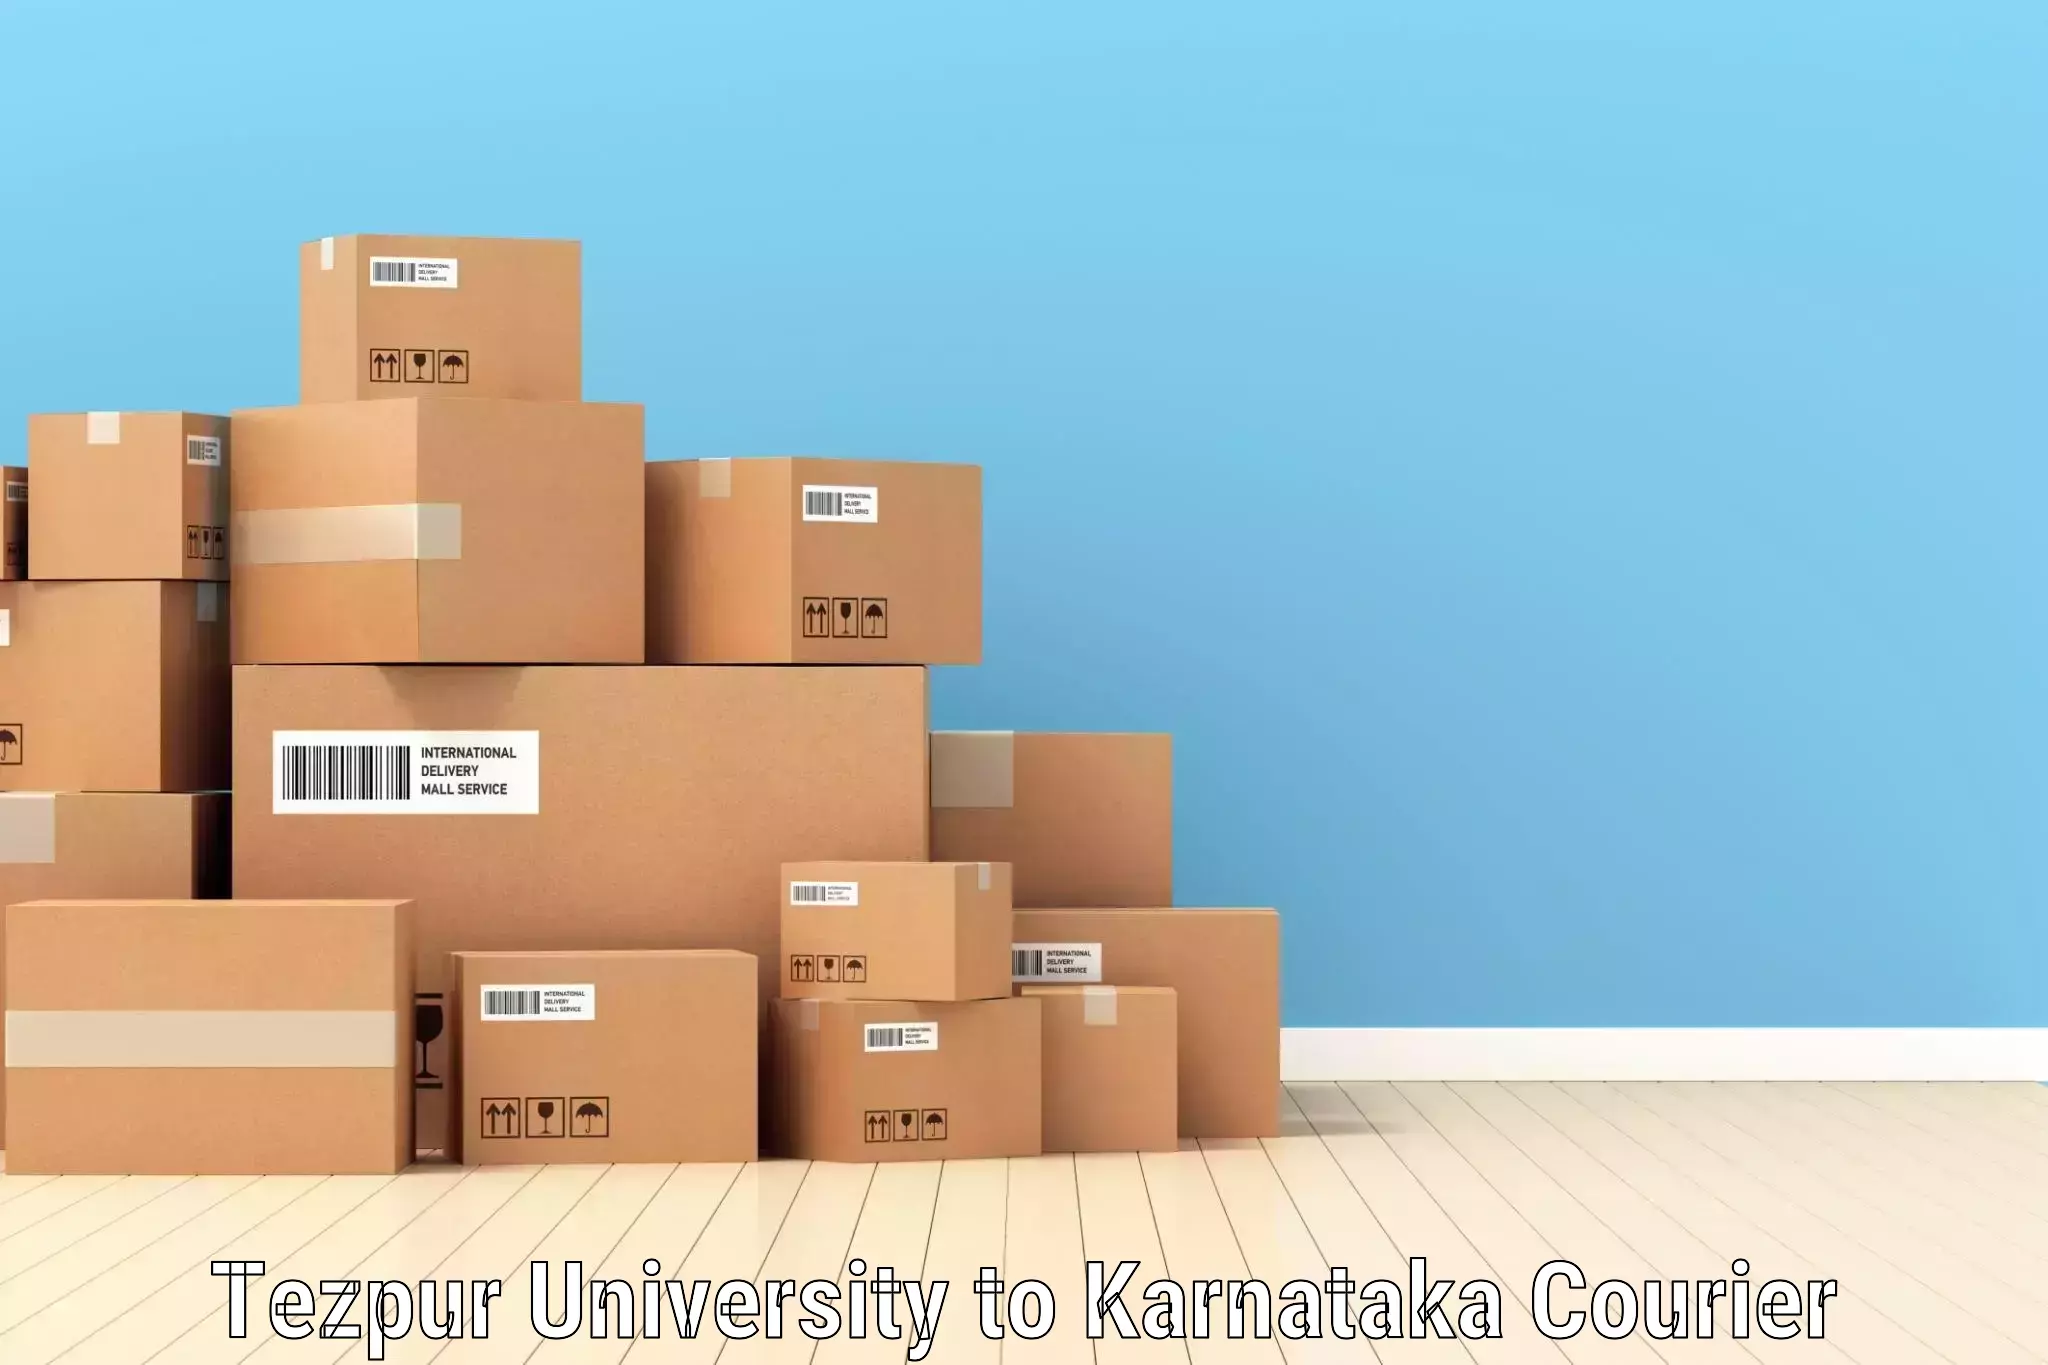 Expedited parcel delivery Tezpur University to Mangalore Port